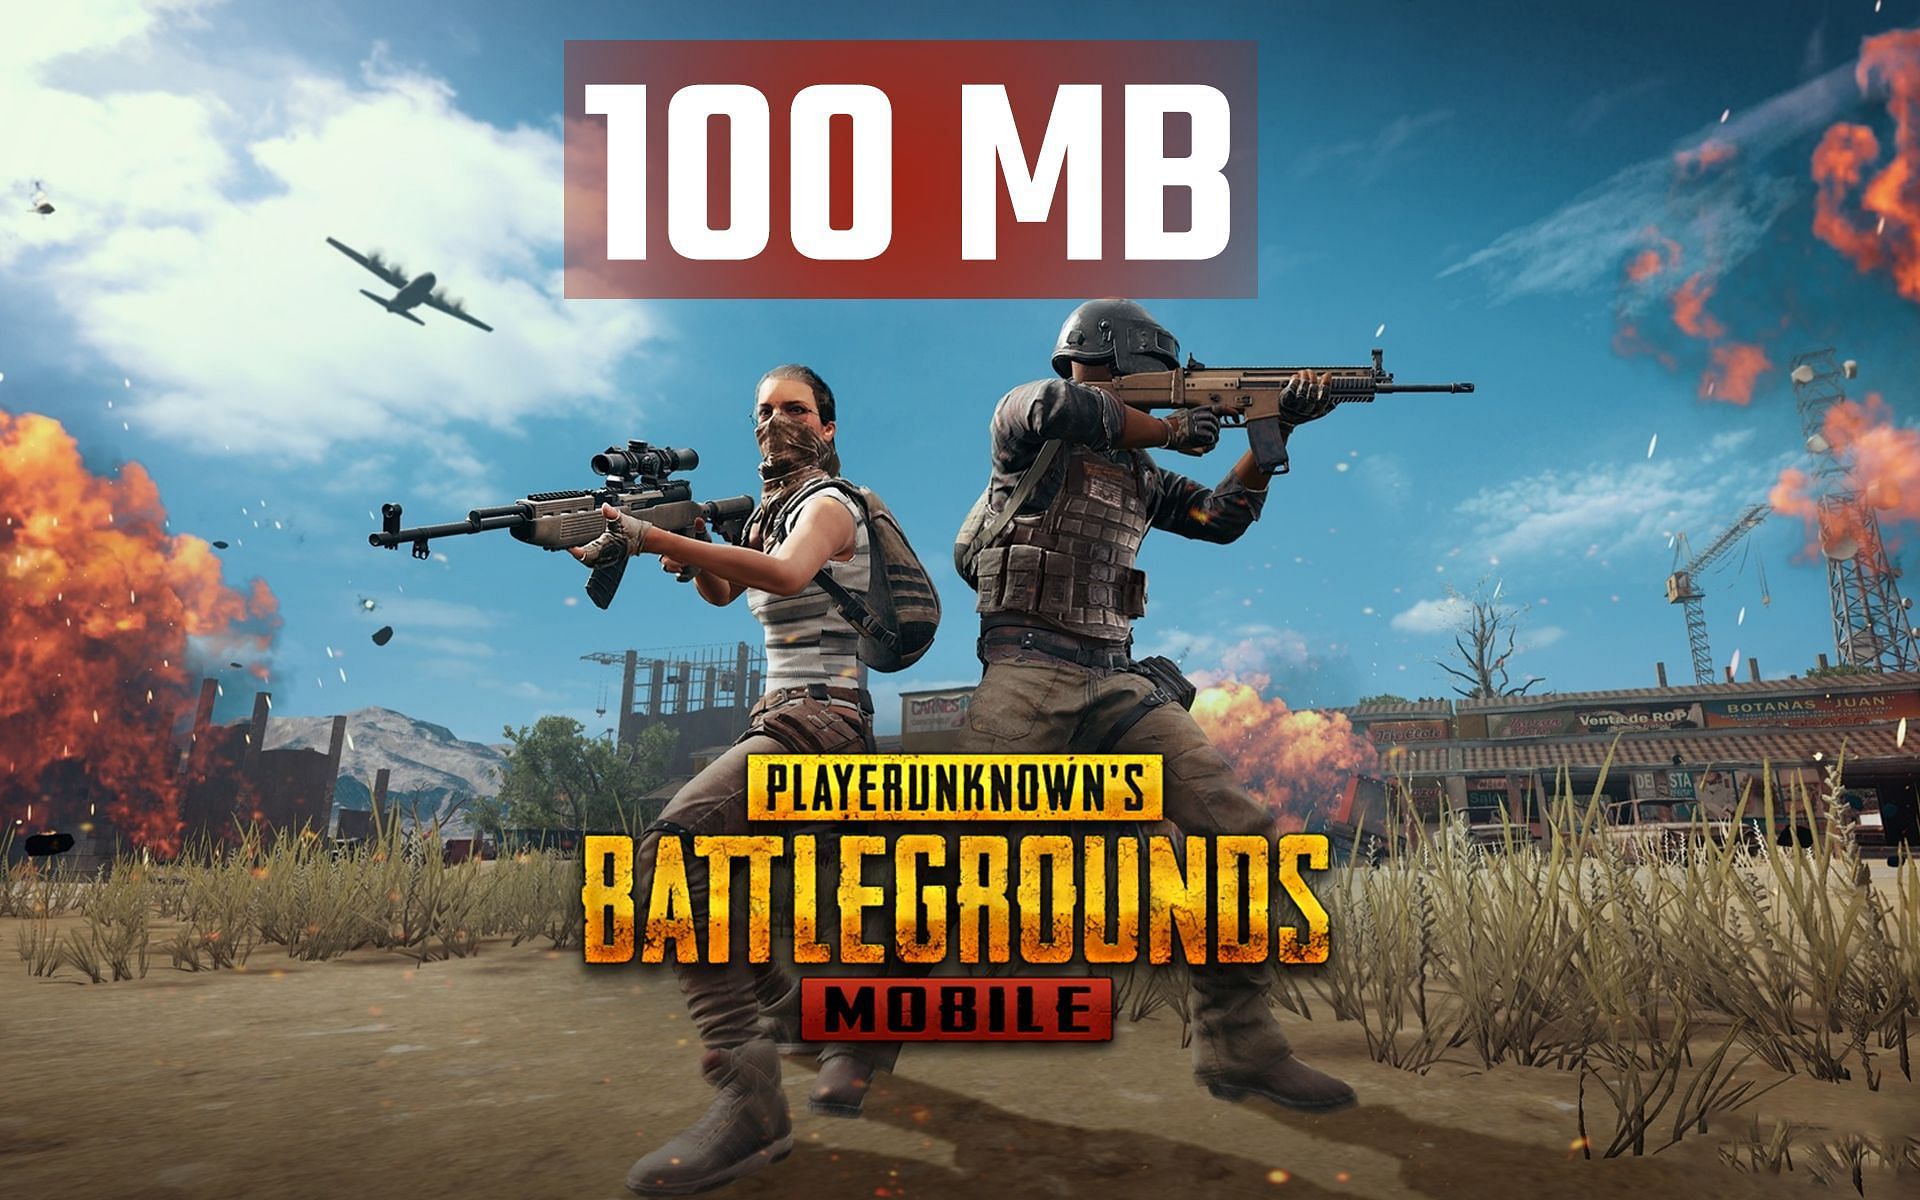 Best Android games like PUBG Mobile with file size under 100 MB (Image via Sportskeeda)